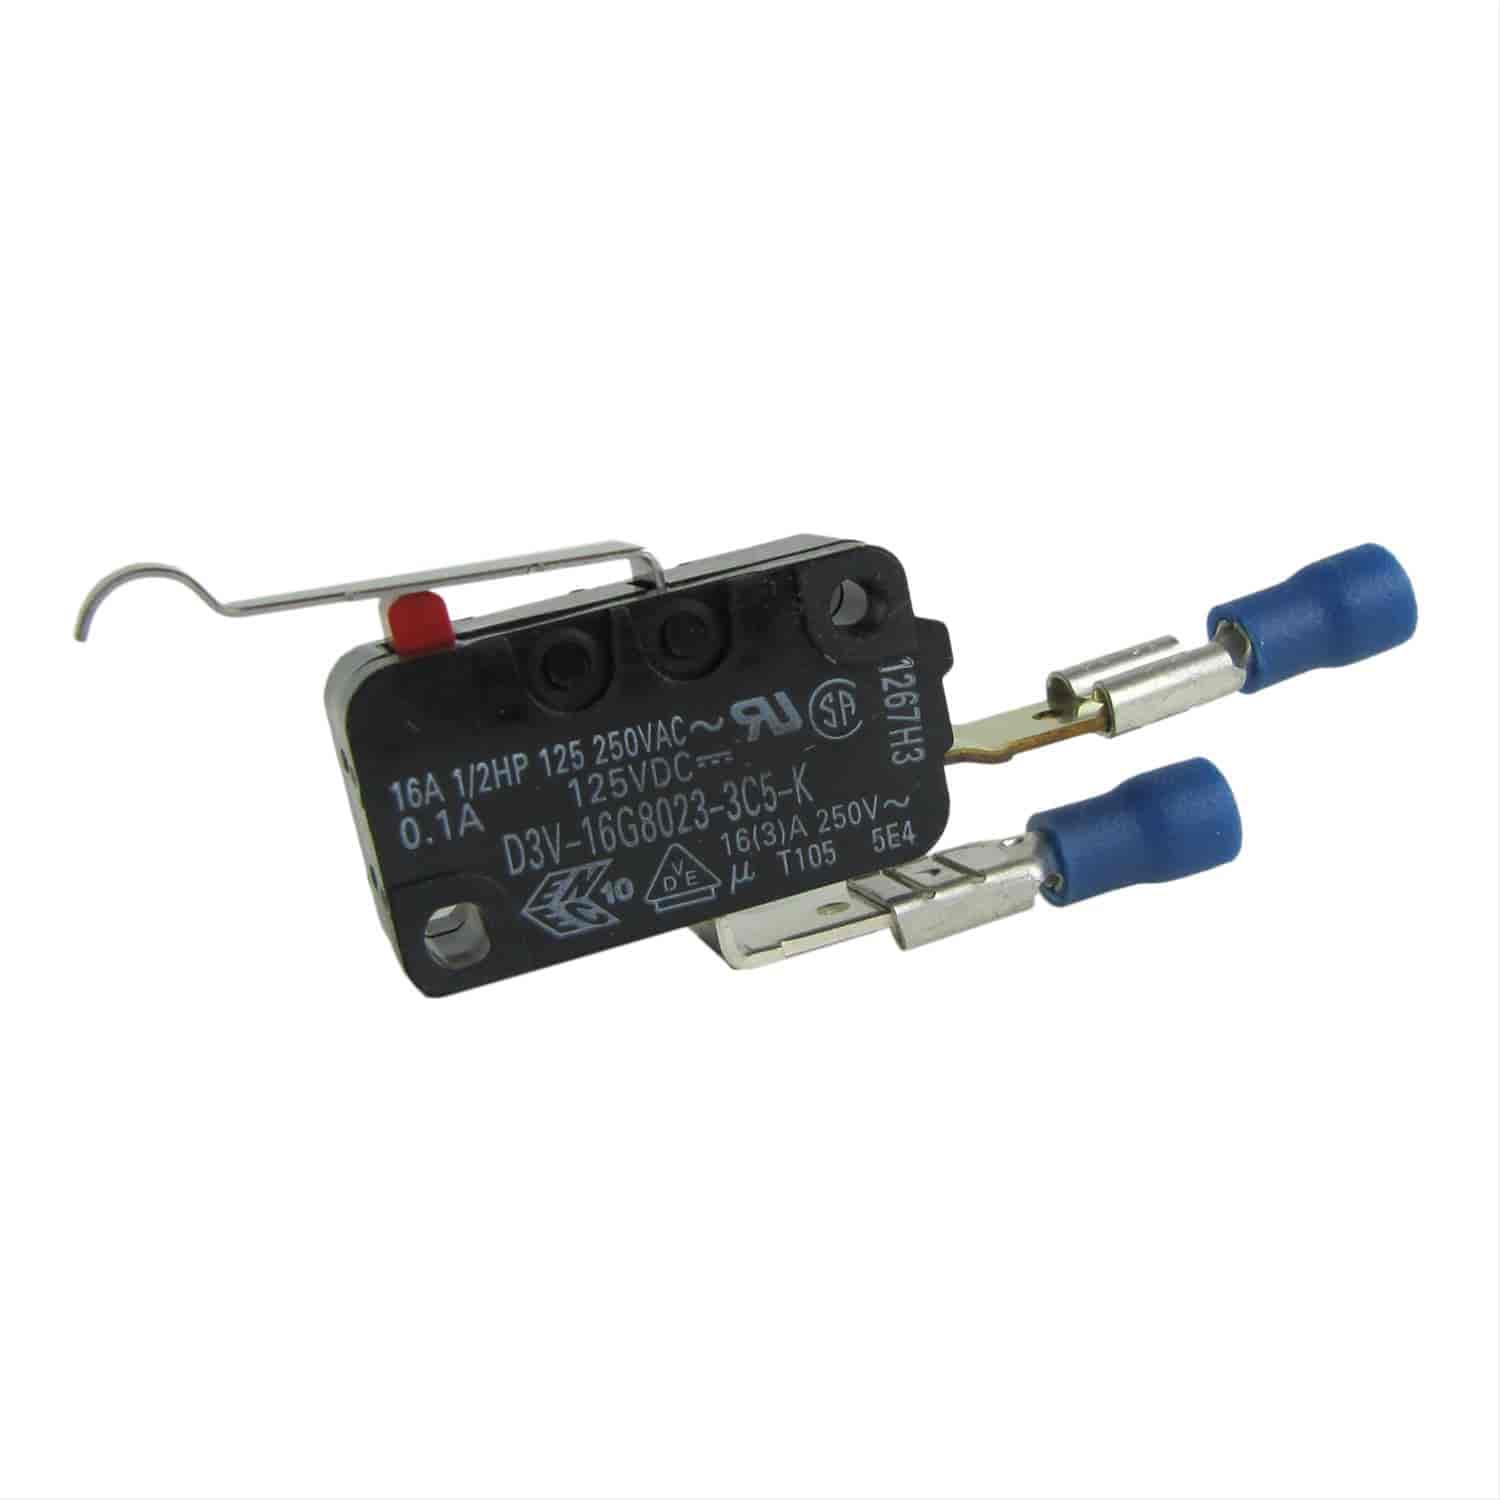 Replacement Micro Switch For Use With Hammer, MegaShifter, Pro Ratchet, QuickSilver, Star and Z-Gate Shifters